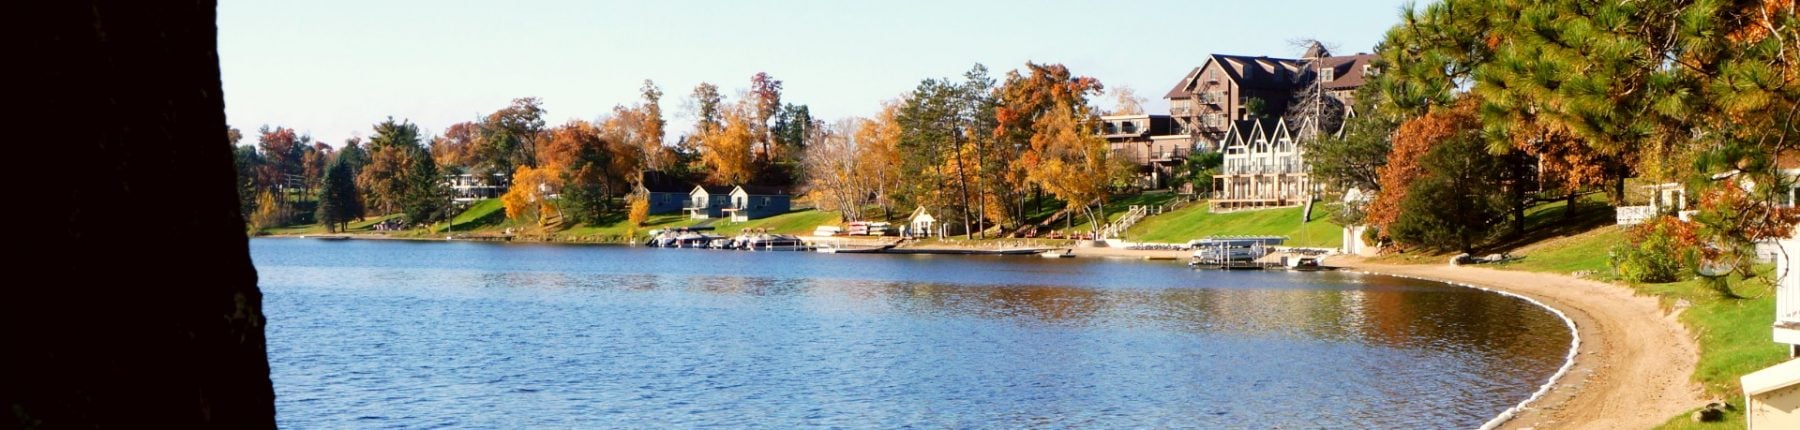 The Gull Lake and its surroundings during fall